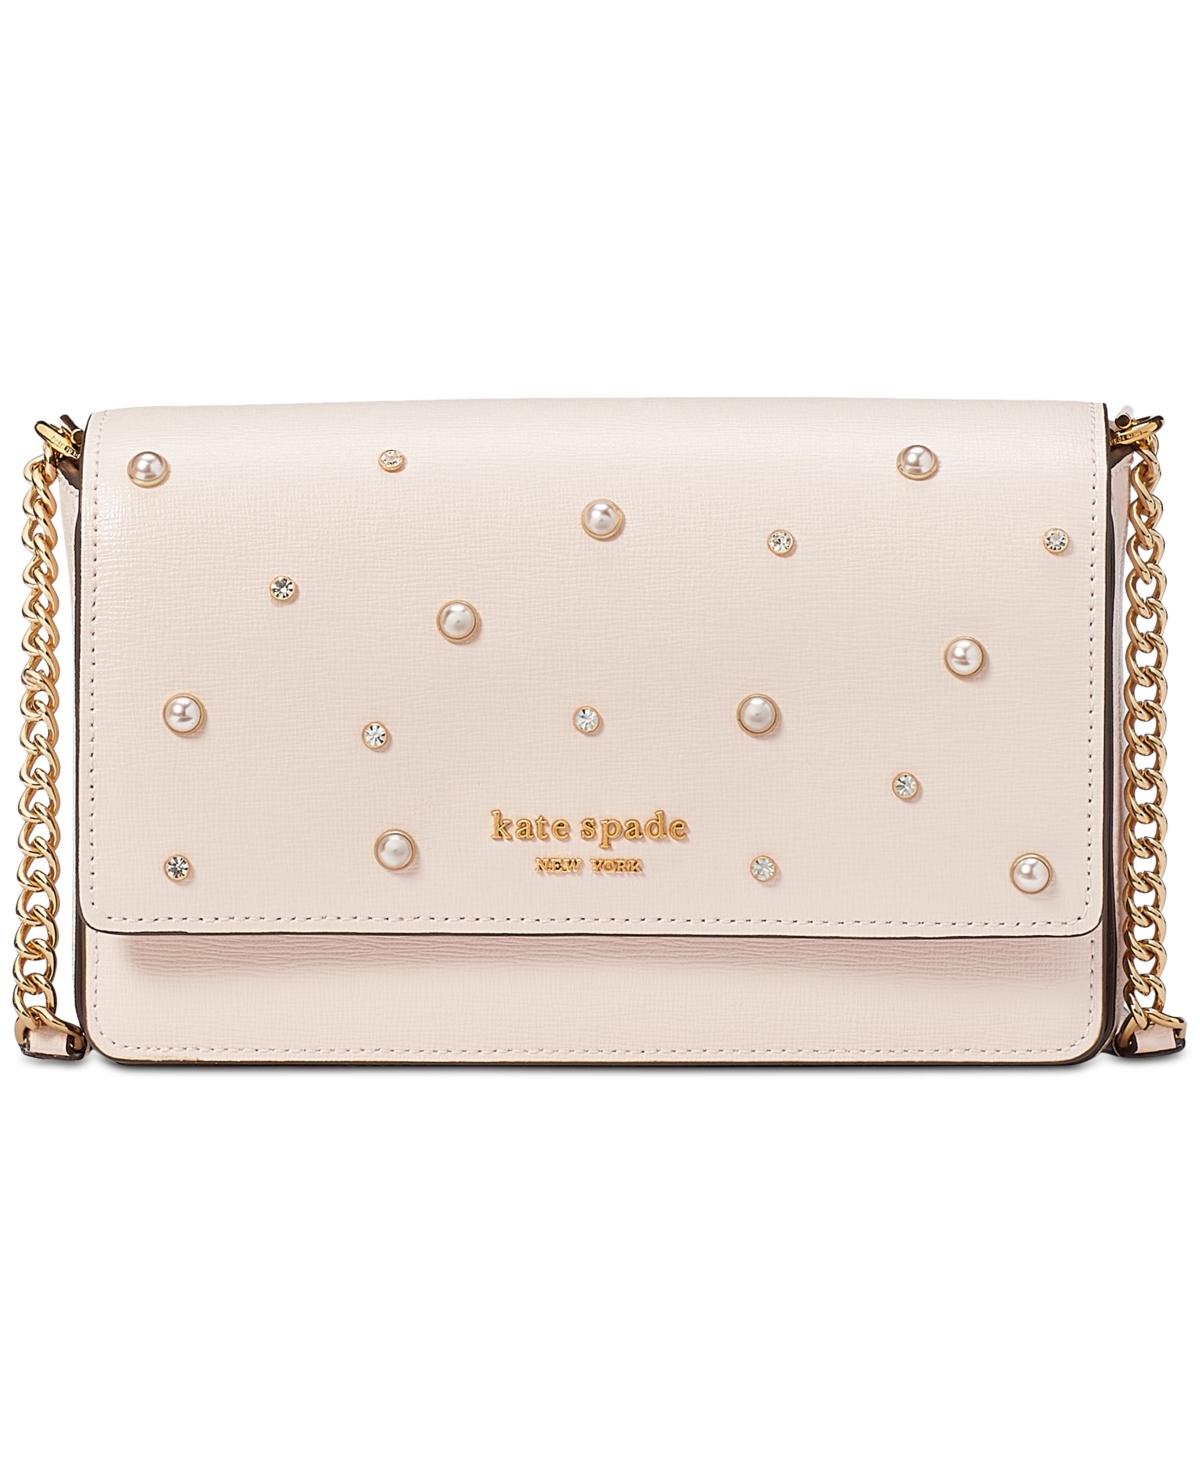 Kate Spade Purl Embellished Saffiano Leather Flap Chain Wallet In Pale Dogwood